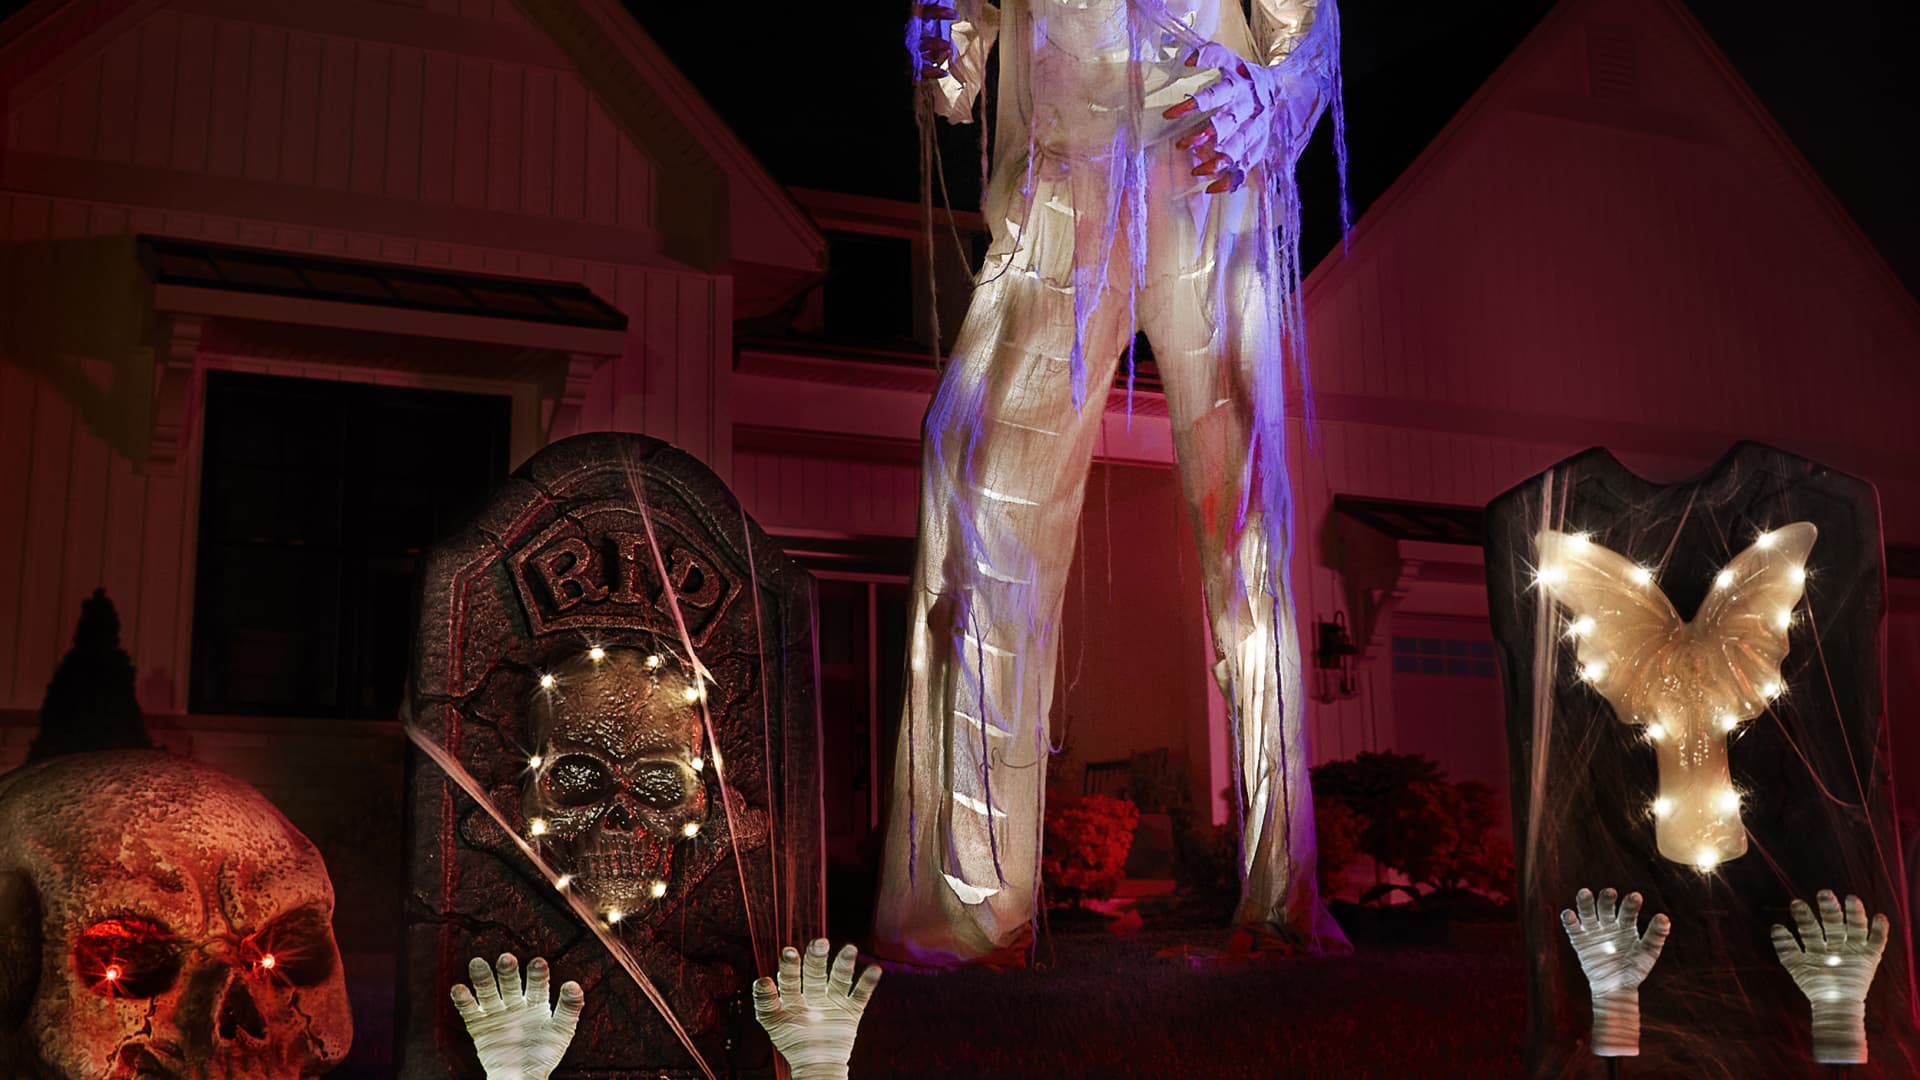 Lowe's debuted a 12-foot mummy this year to tap into customers' enthusiasm for Halloween. It is exclusive to the retailer and sells for $348.